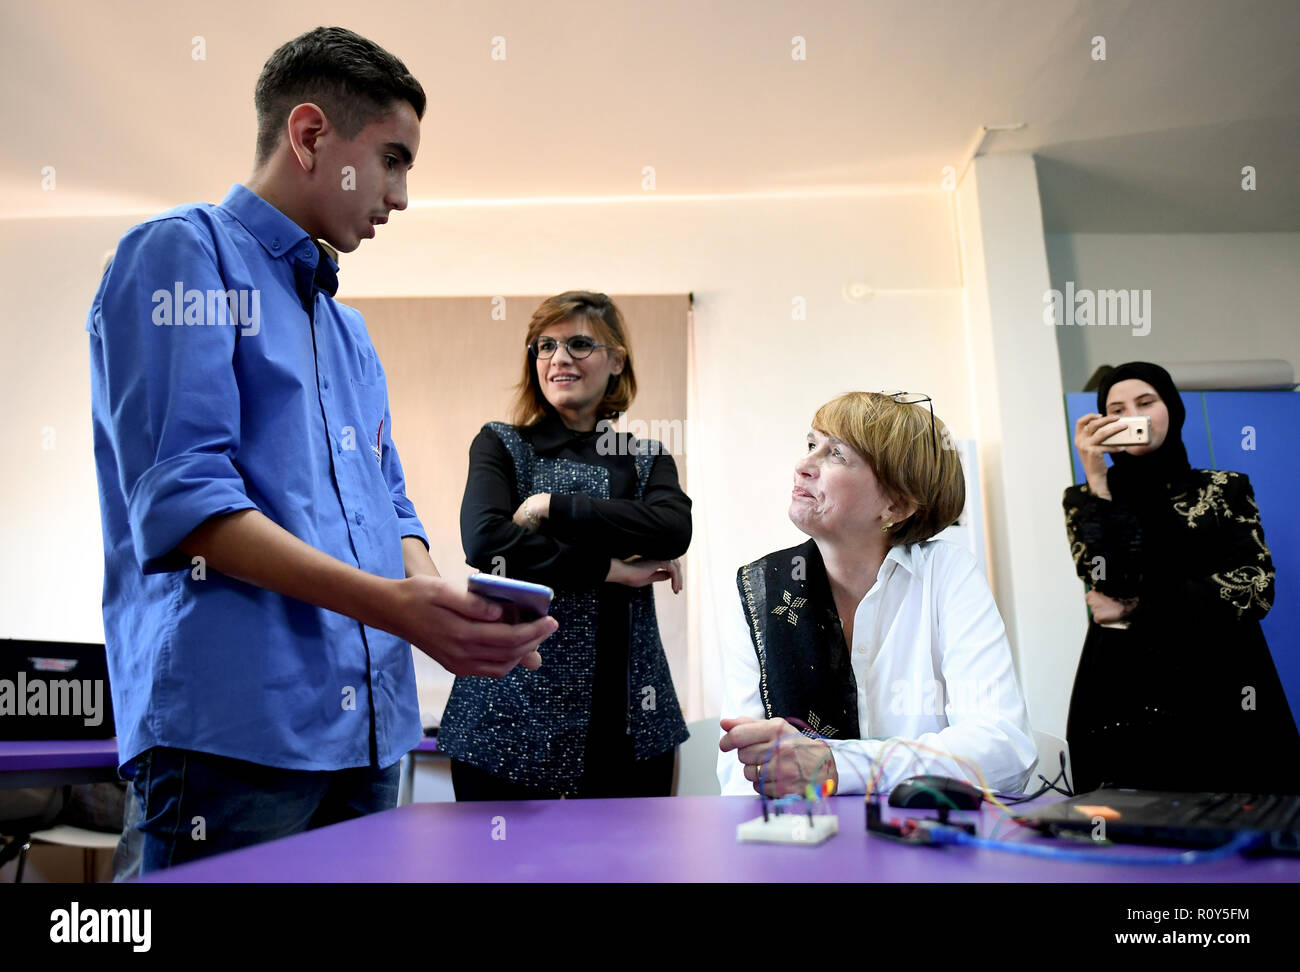 Bednayel, Lebanon. 29th Oct, 2018. Elke Büdenbender, wife of the German President, talks to Chodar at the LOST Center (Lebanese Organization for Studies and Trainings) about an app programmed by the young man. As patron of Unicef, she visits aid projects, educational institutions and meets refugees from Syria. Credit: Britta Pedersen/dpa-Zentralbild/dpa/Alamy Live News Stock Photo